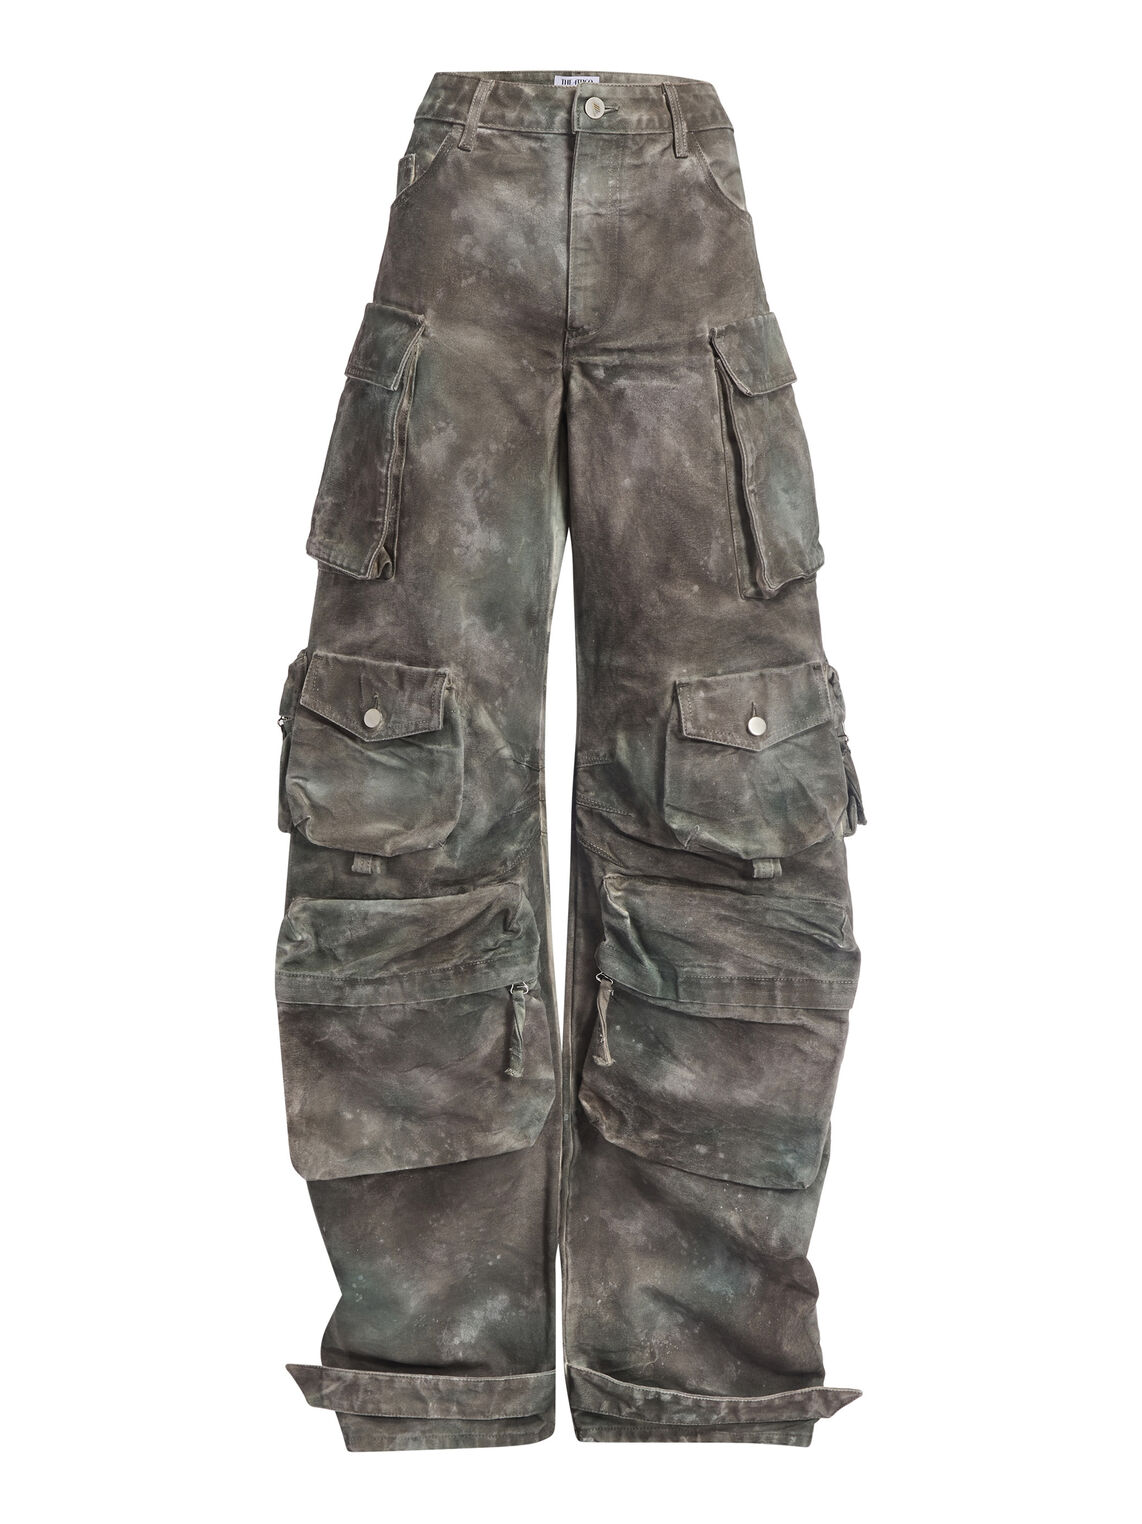 THE ATTICO "Fern" camouflage green pants 4